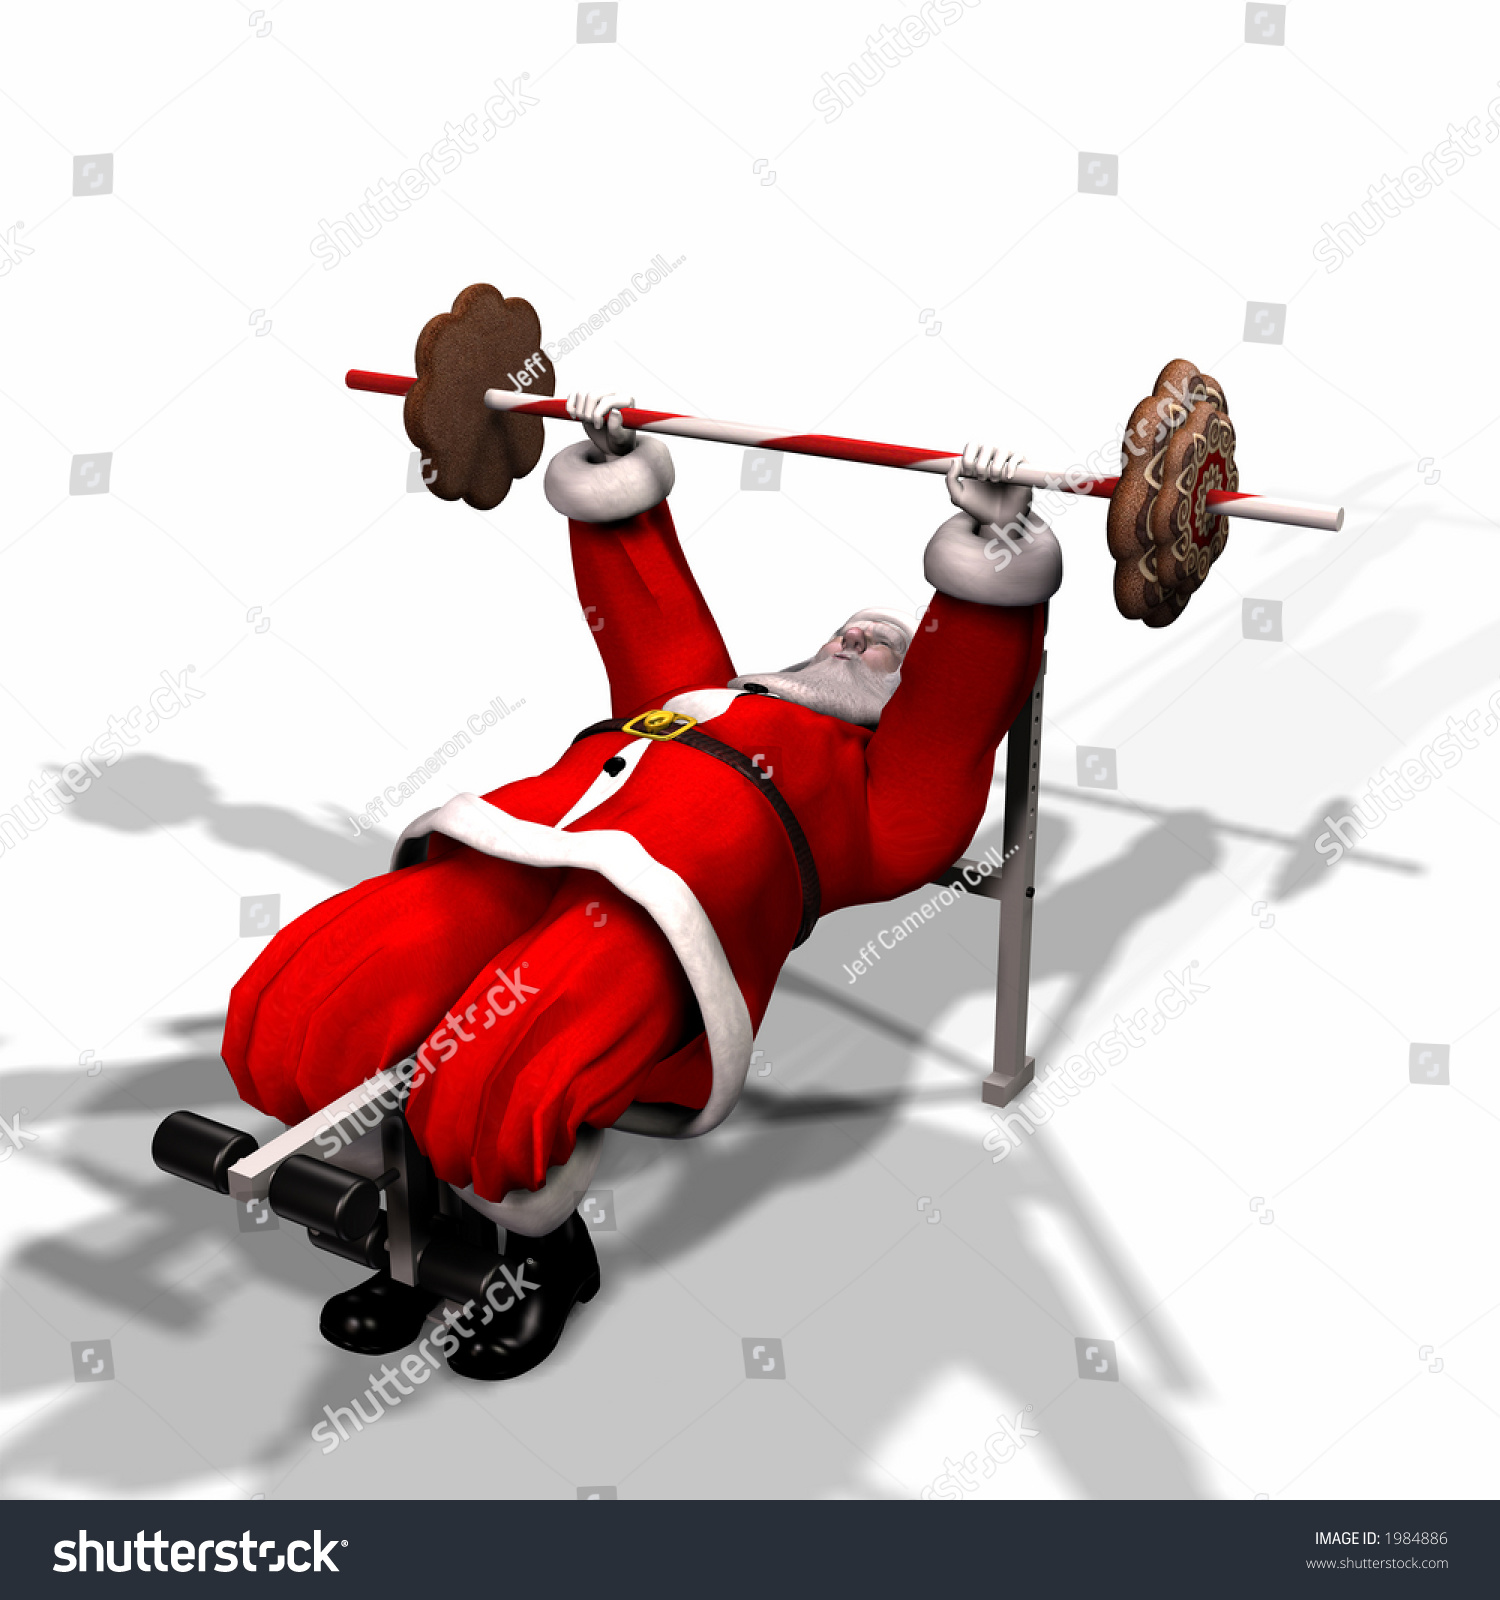 Santa Working Out By Lifting Weights Stock Illustration 1984886 ...